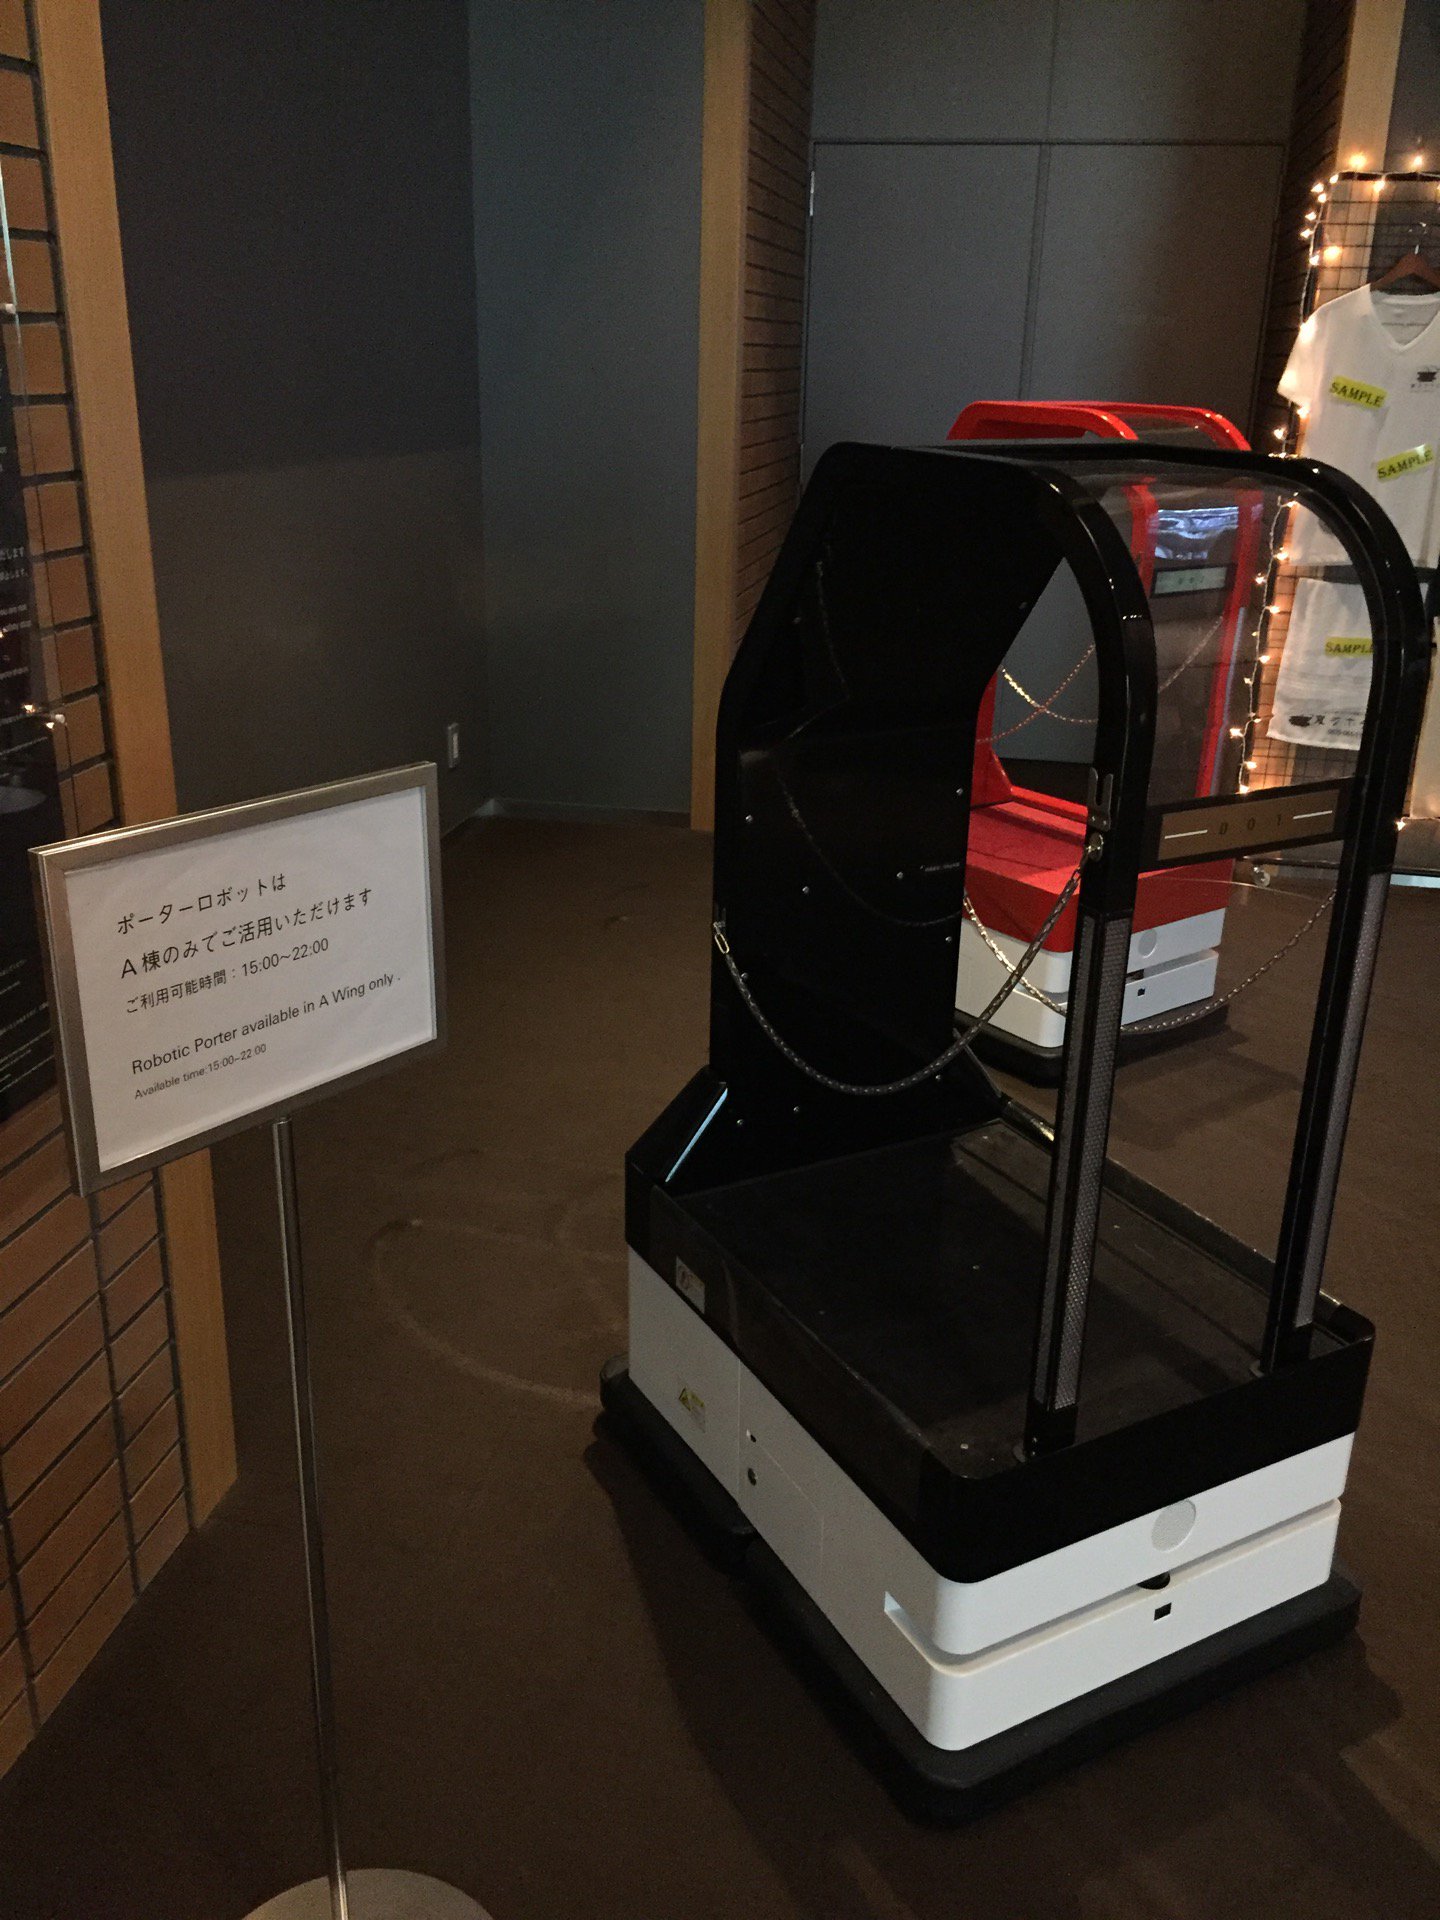 Henn-na Hotel with working robots at Huis Ten Bosch